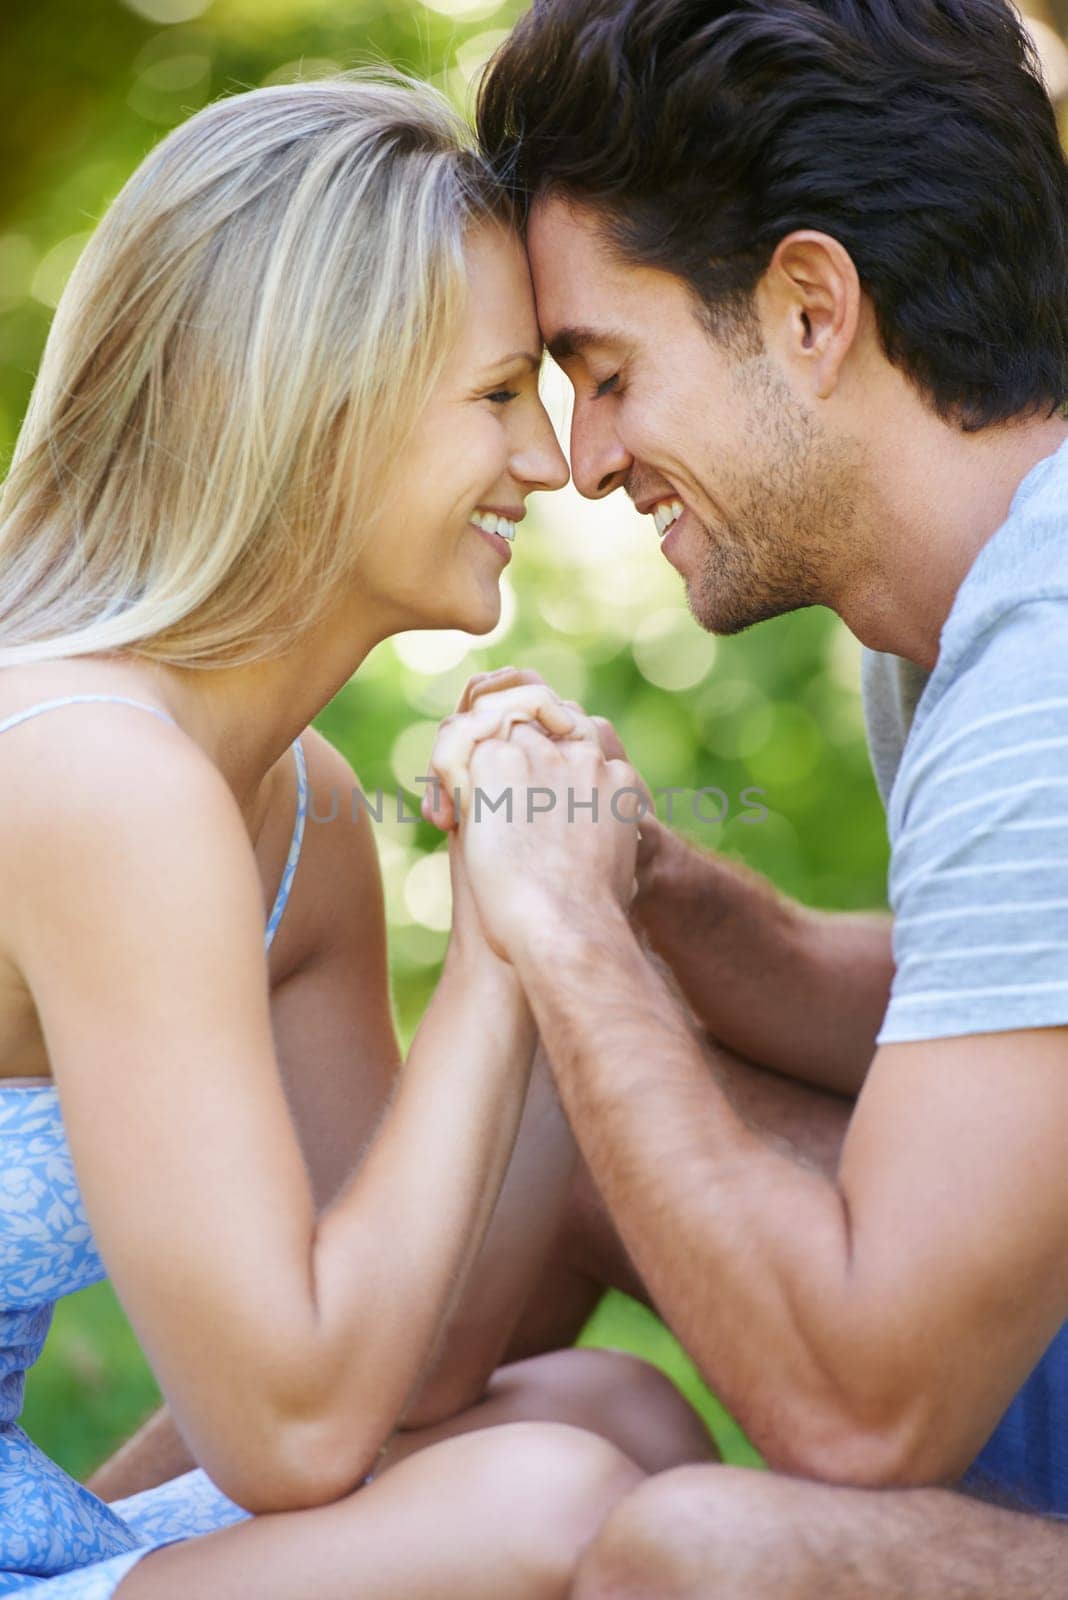 Romance, love or happy couple holding hands in nature for date, support or care on a summer in park together. Relax, man or woman on outdoor holiday vacation for bond, travel or freedom in Australia.